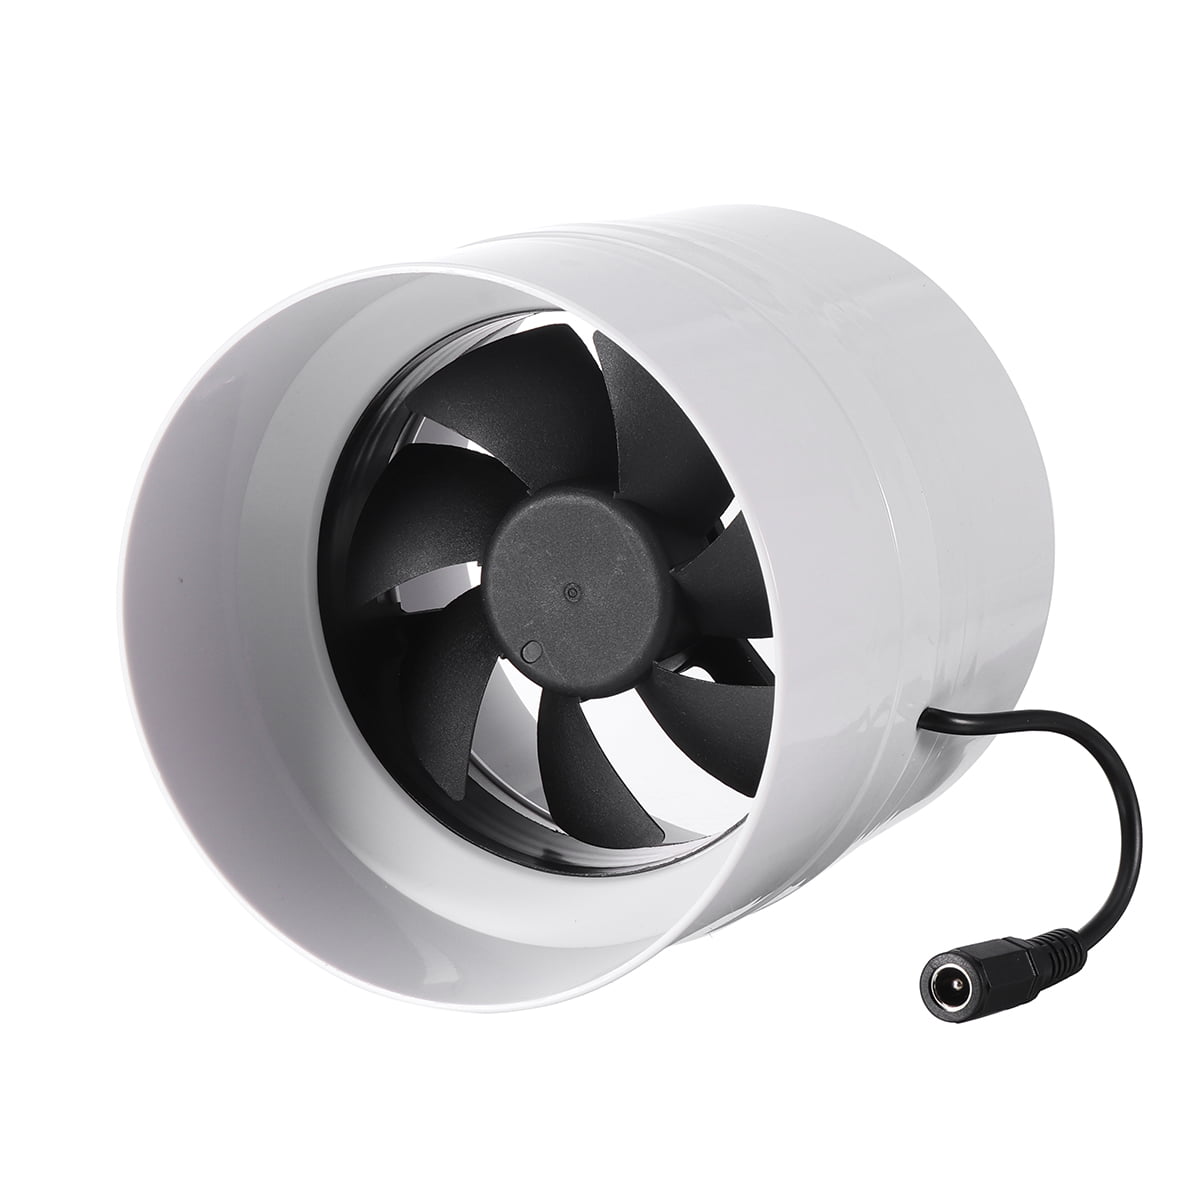 110mm 4 inch Exhaust Fan Wall Window Pipe Duct Ventilation For Kitchen